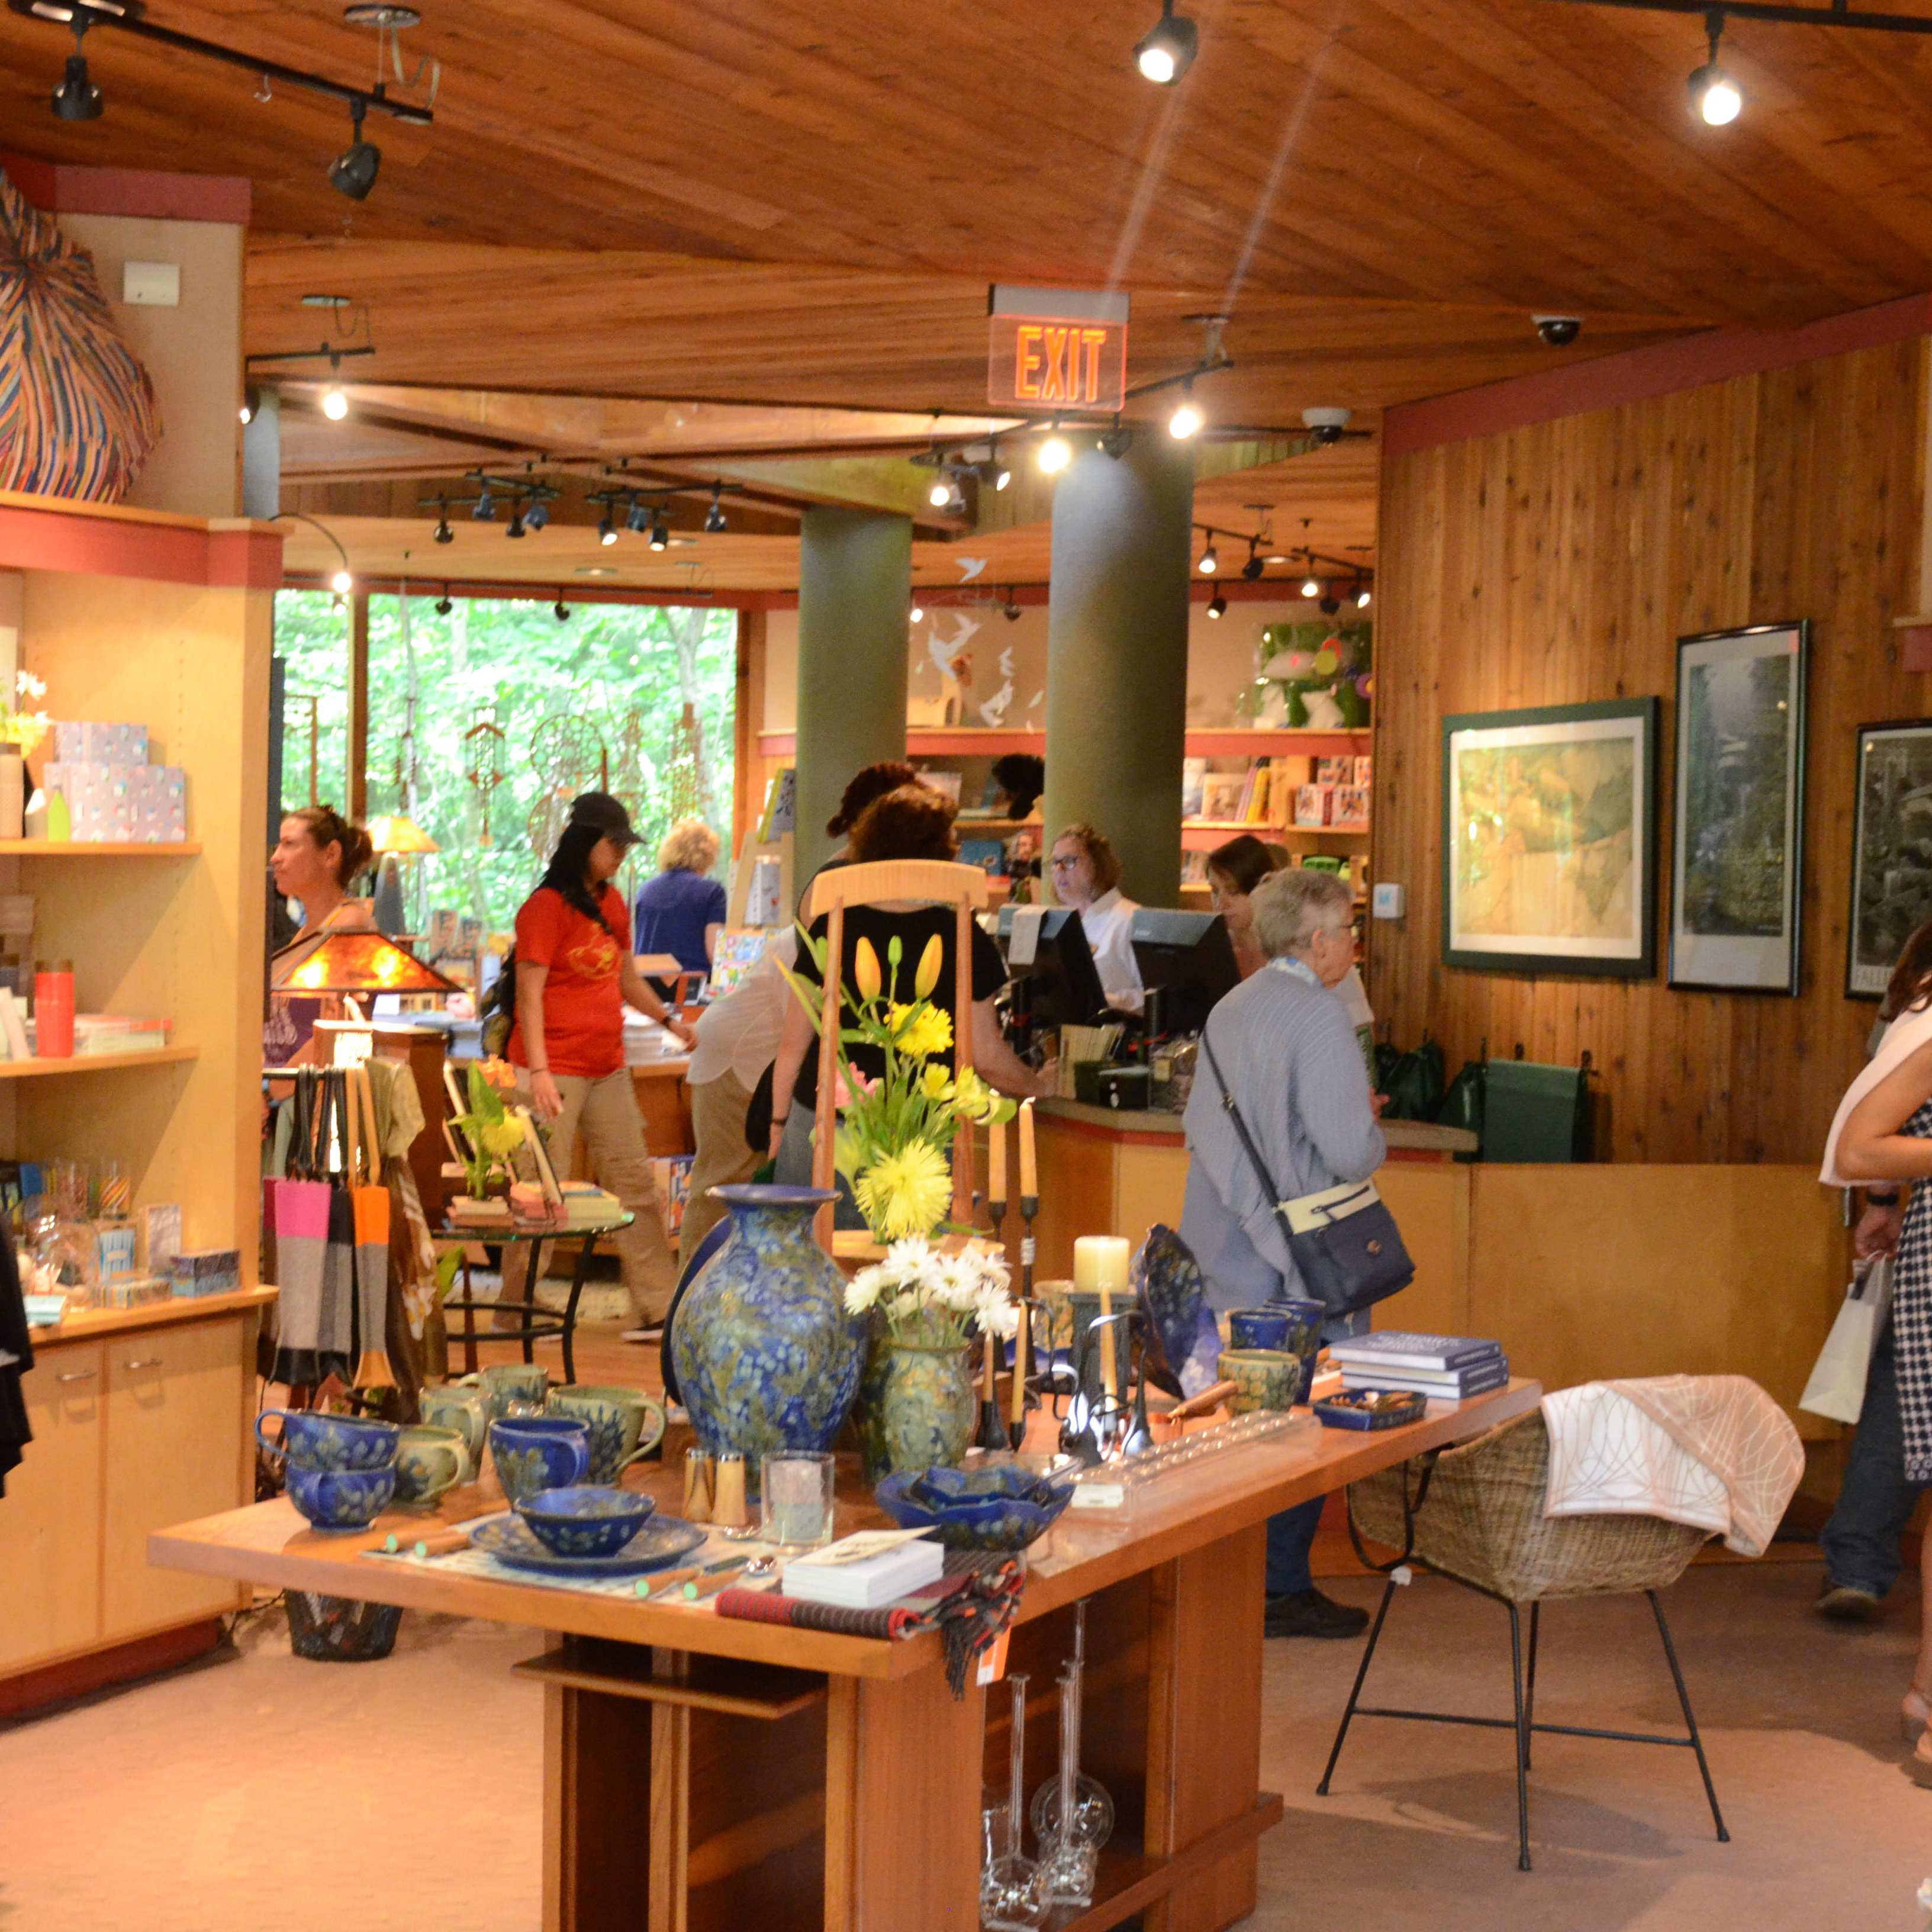 Visitors will enjoy shopping at Fallingwater's Museum Store, located in the Visitors Center.